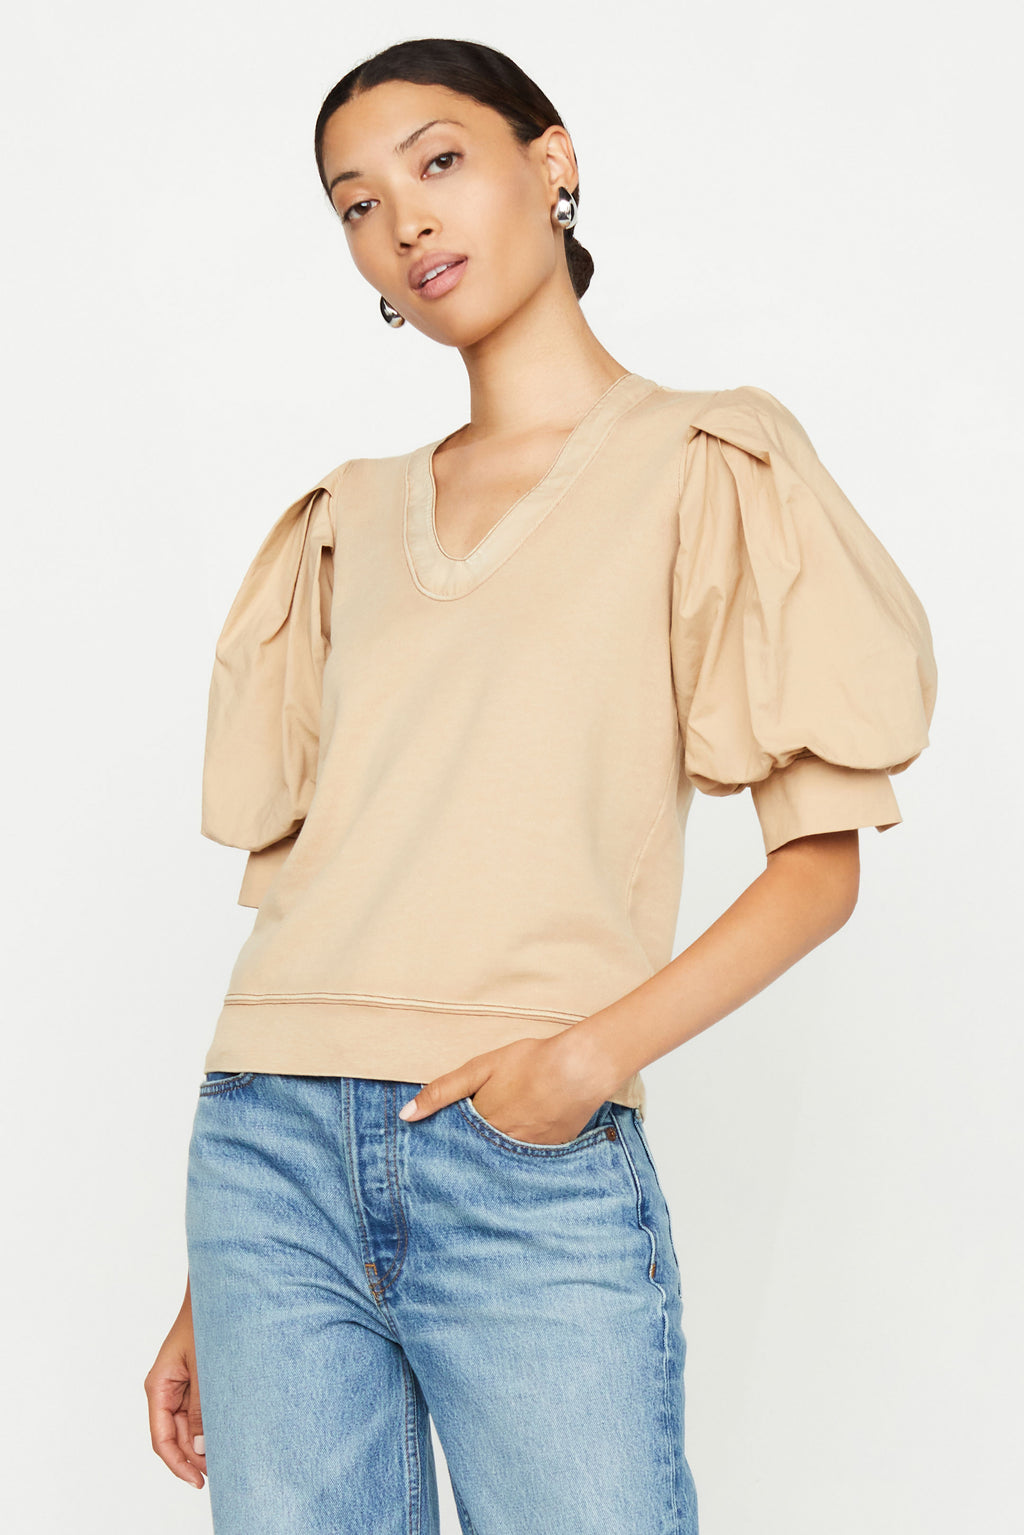 Beige top with a straight silhouette with v-neckline and puff sleeves